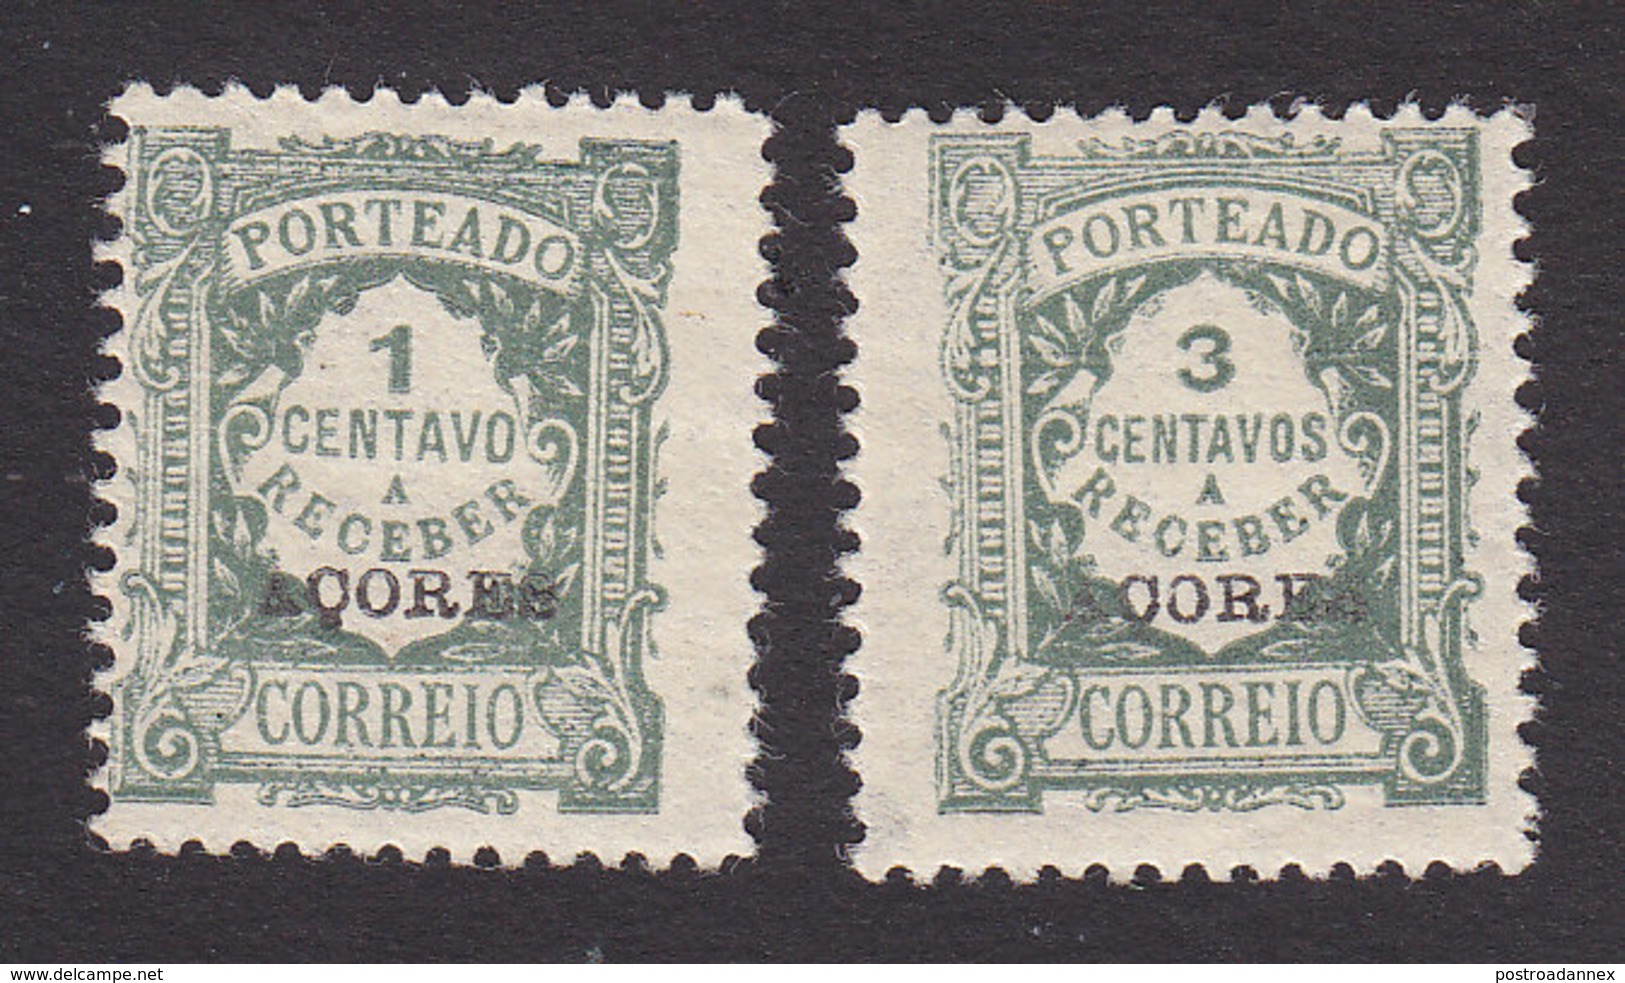 Azores, Scott #J31, J33, Mint Hinged, Postage Due Overprinted, Issued 1922 - Açores